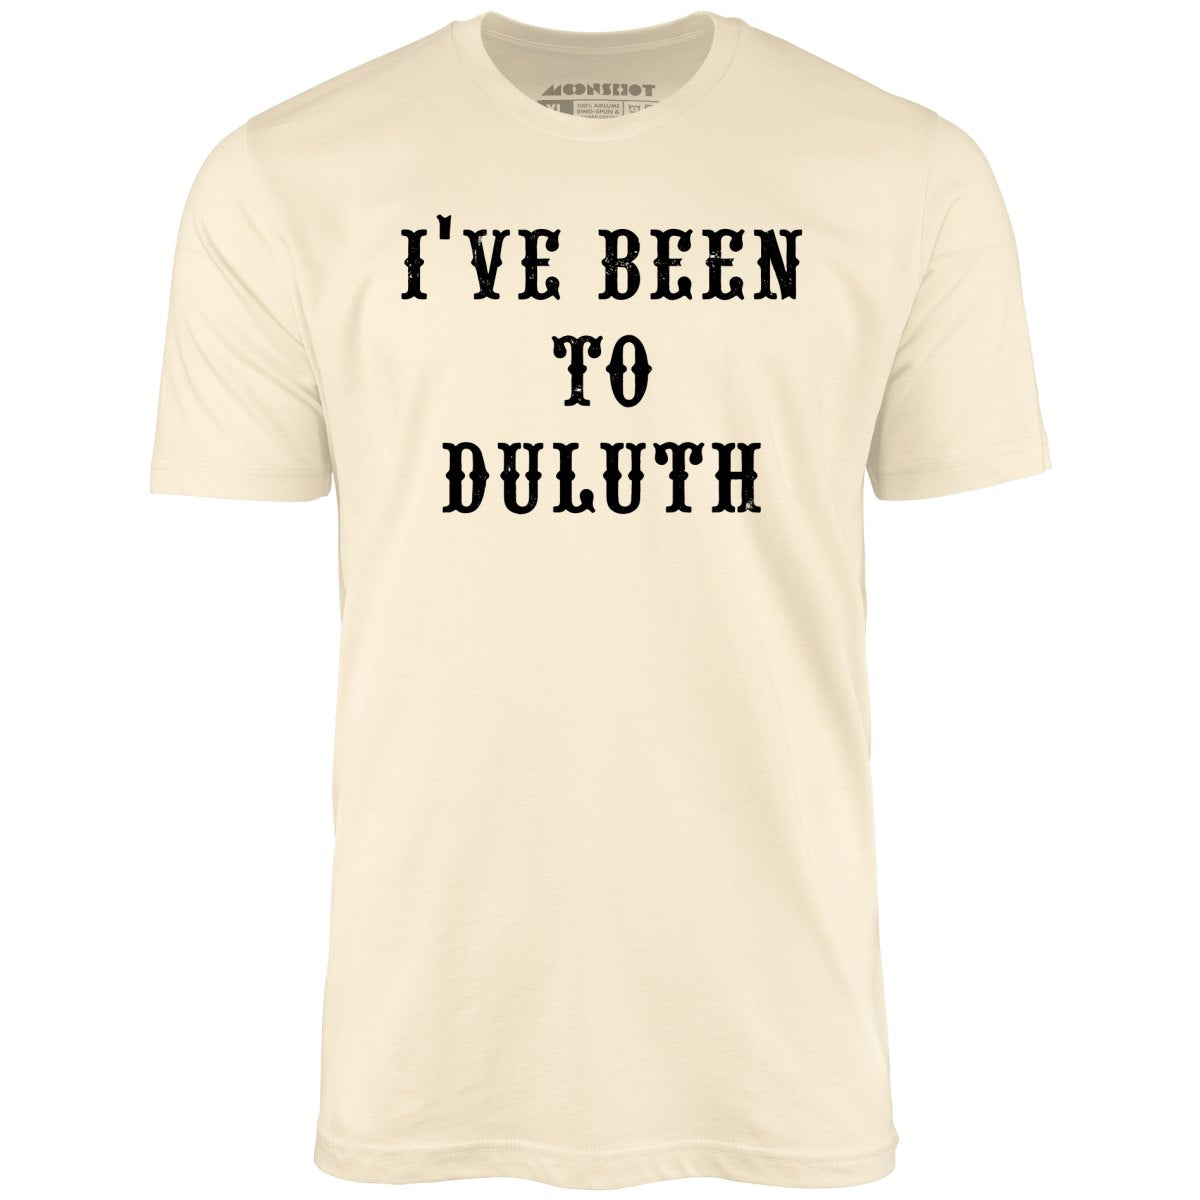 I've Been to Duluth - Unisex T-Shirt